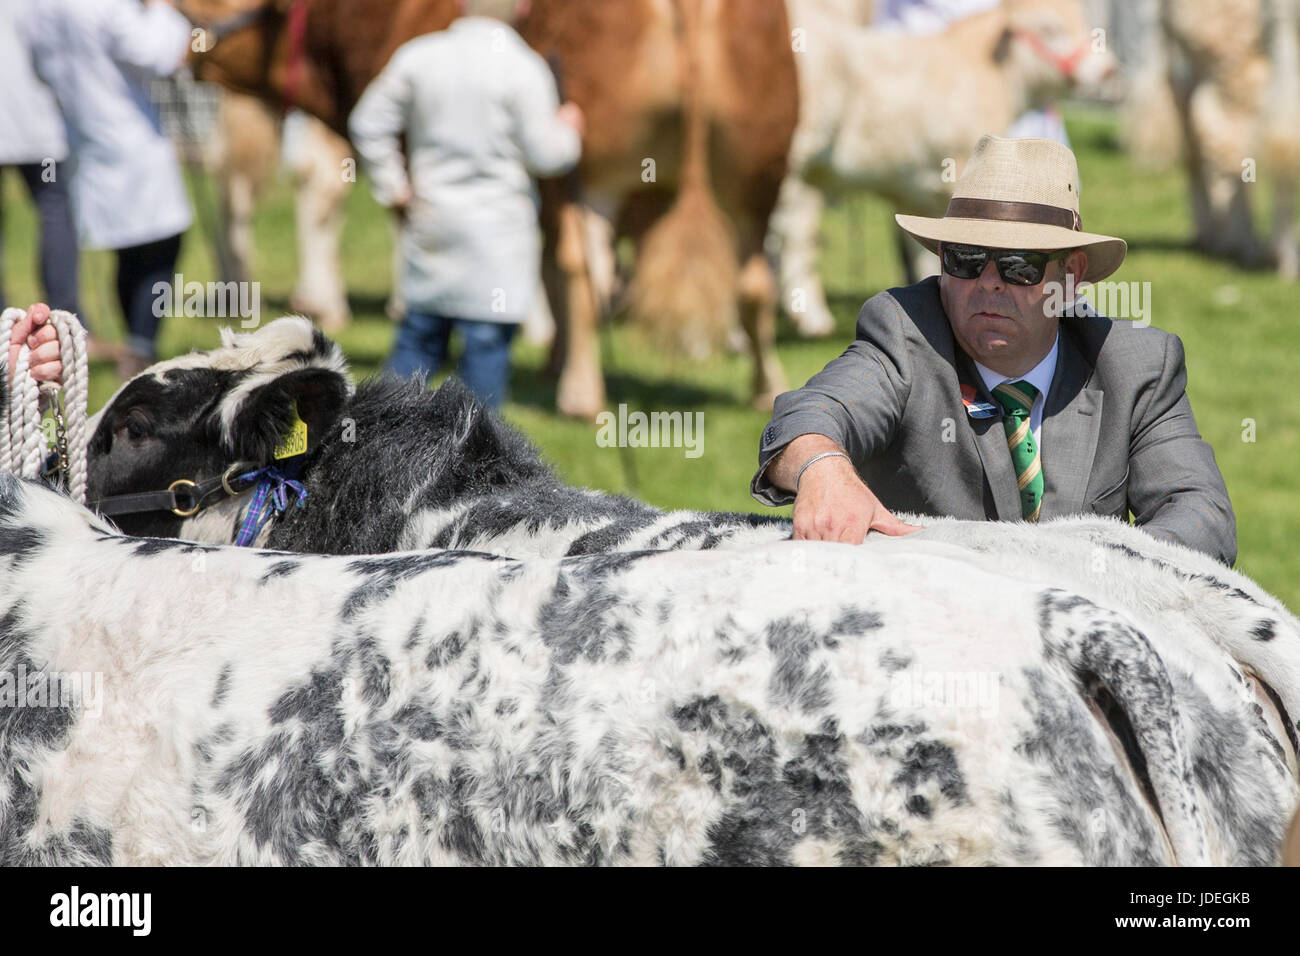 A bull is inspected during the Royal Welsh Show 2016 at the Royal Welsh Showground, Llanelwedd, Builth Wells, Powys, Wales, UK, July 19th 2016. Stock Photo